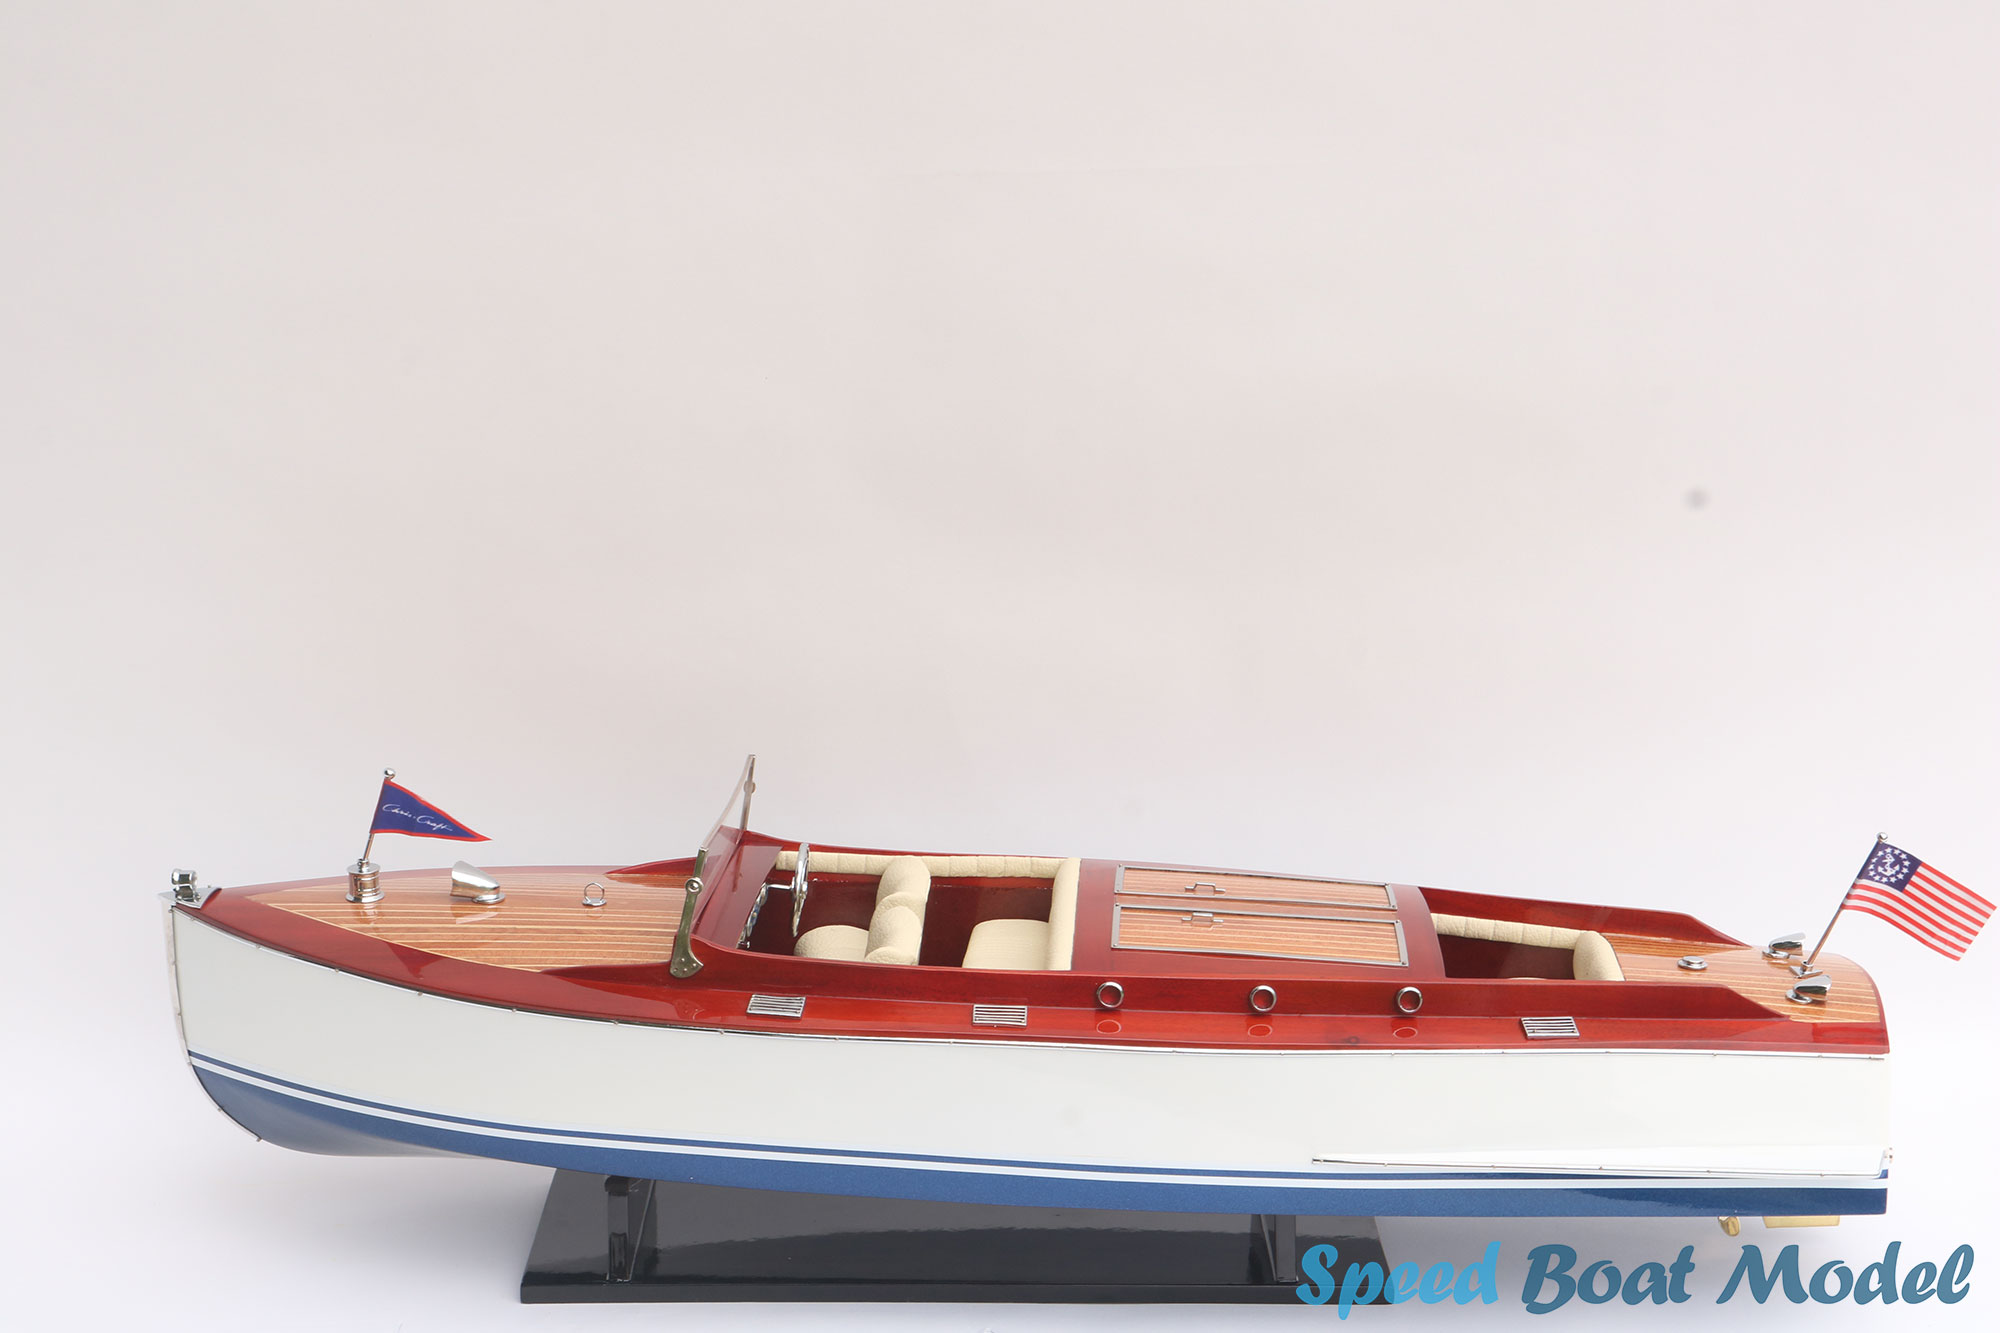 Chris Craft Runabout 1930 Blue & White Hull Speed Boat Model 32.28"